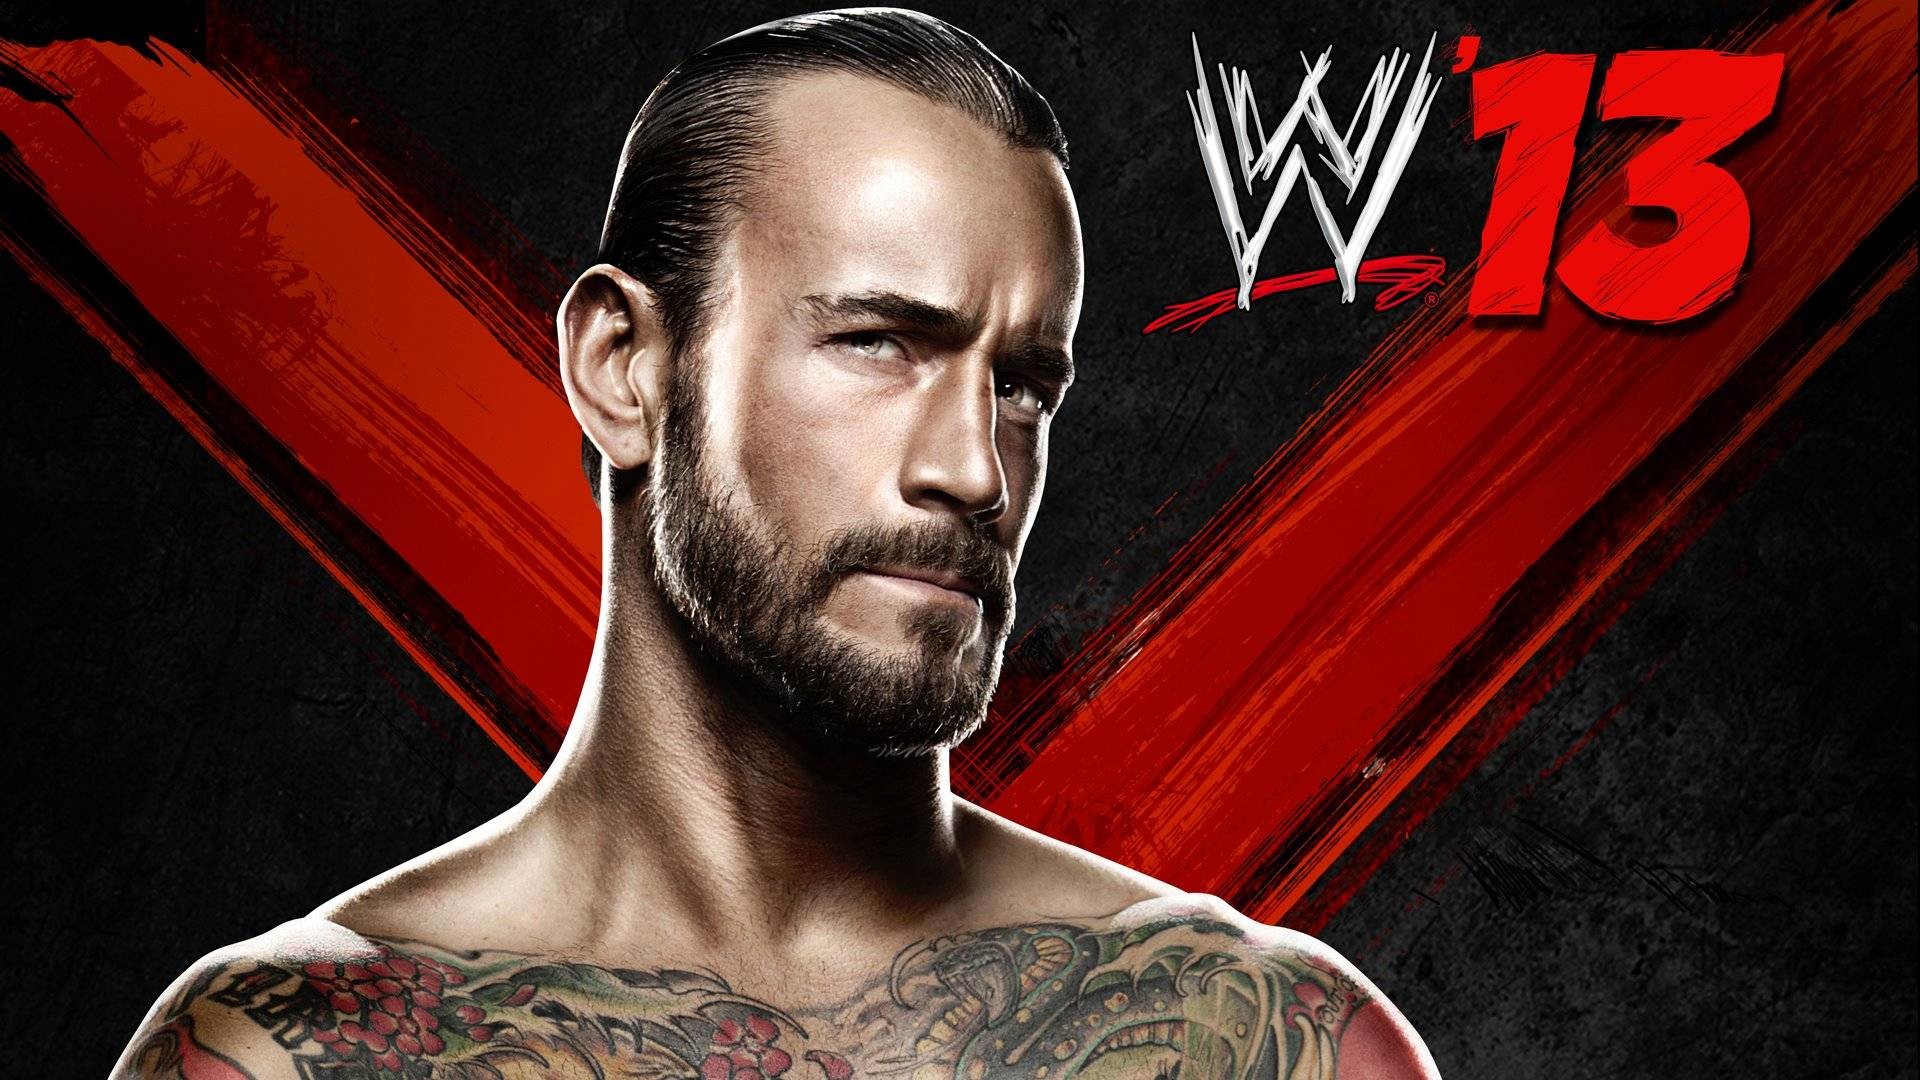 1920x1080 WWE 13 Wallpapers in HD Â« GamingBolt.com: Video Game News, Reviews .